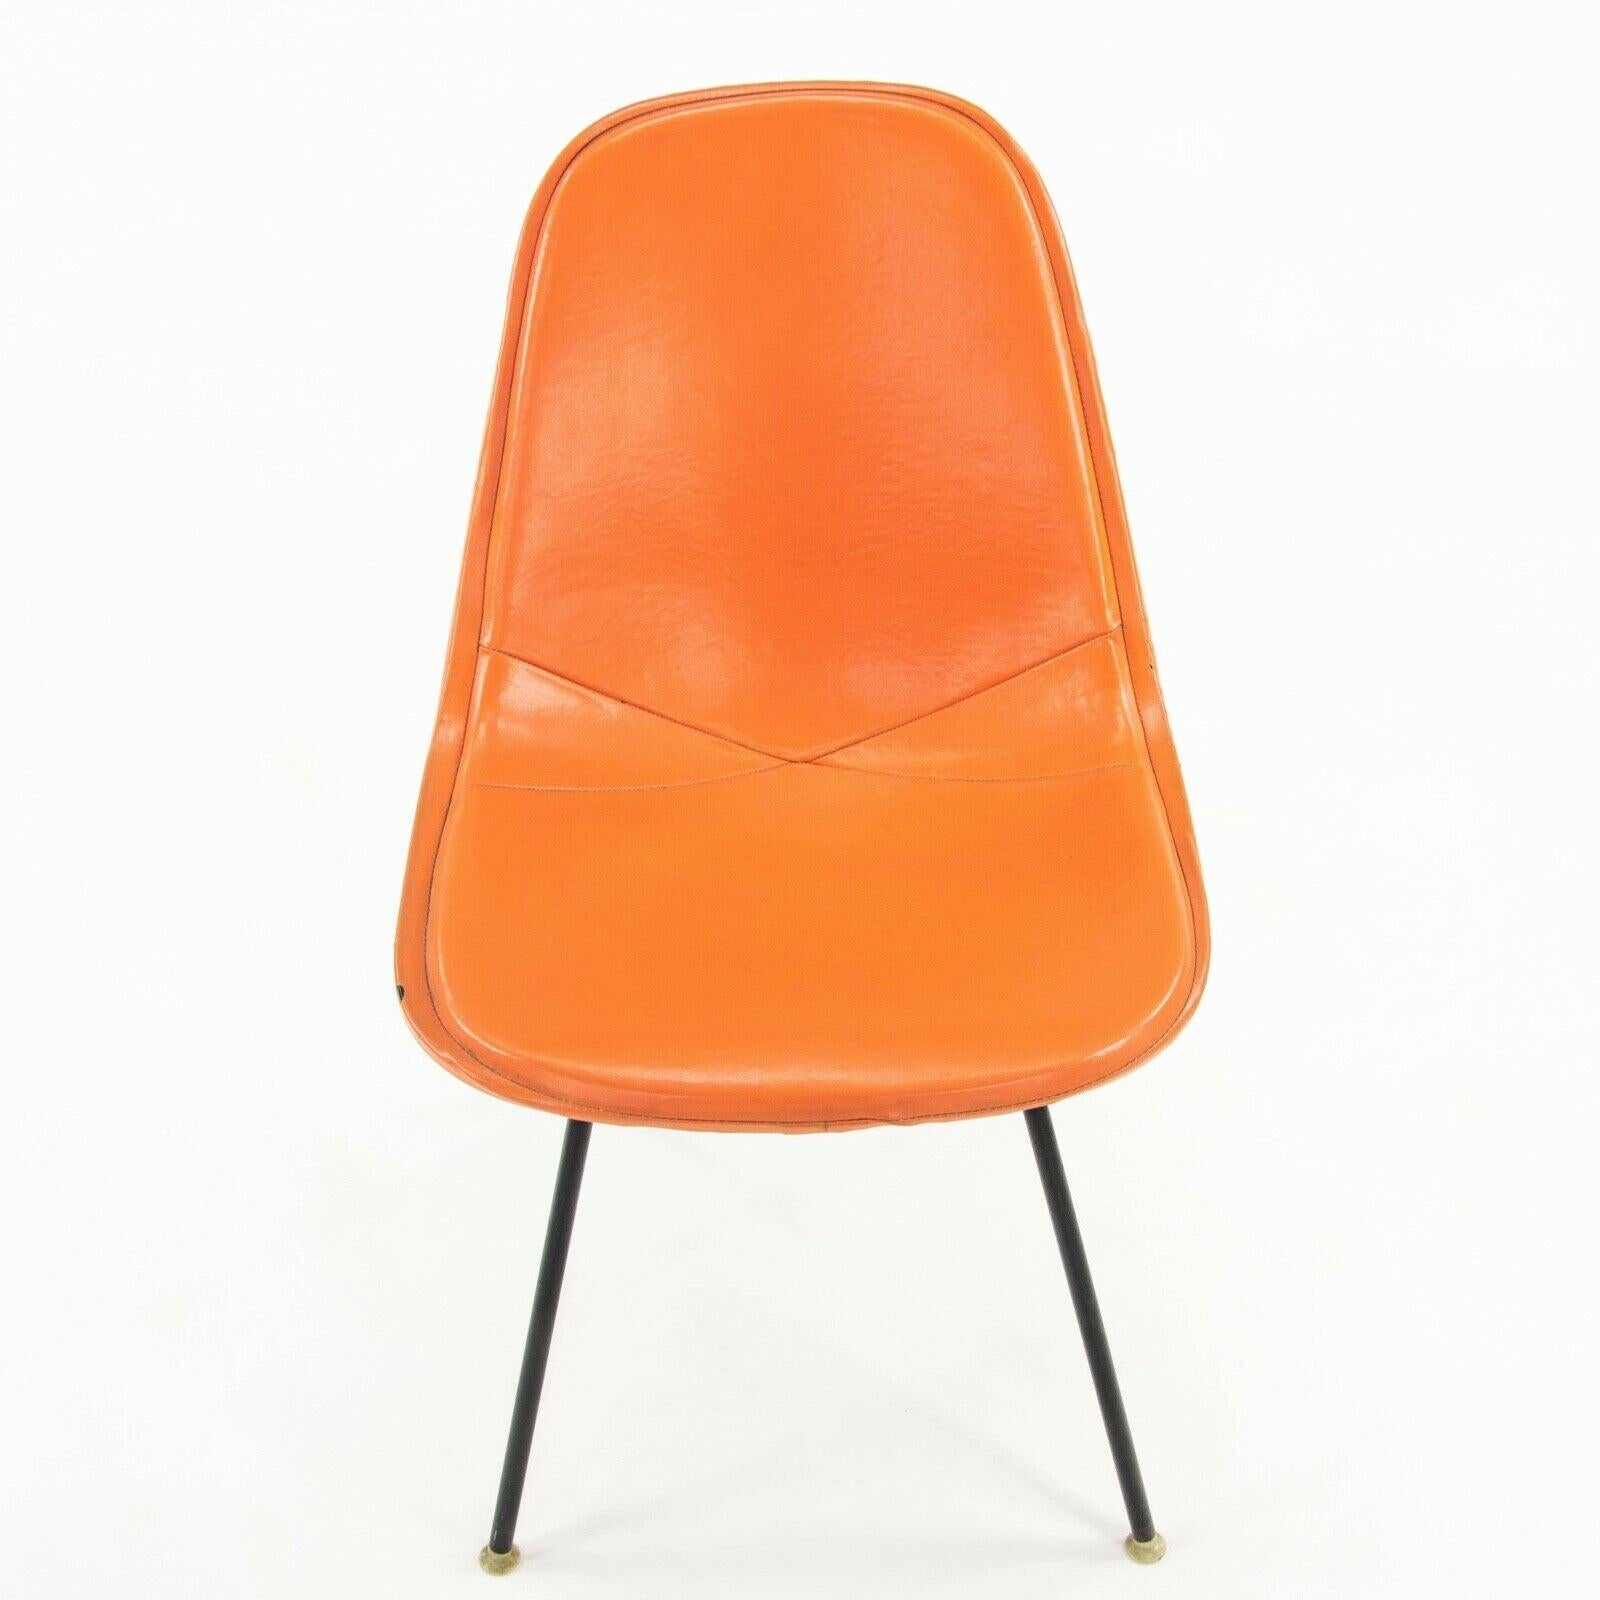 1957 Herman Miller Eames DKX Wire Dining Chair with Full Naugahyde Orange Pad For Sale 3